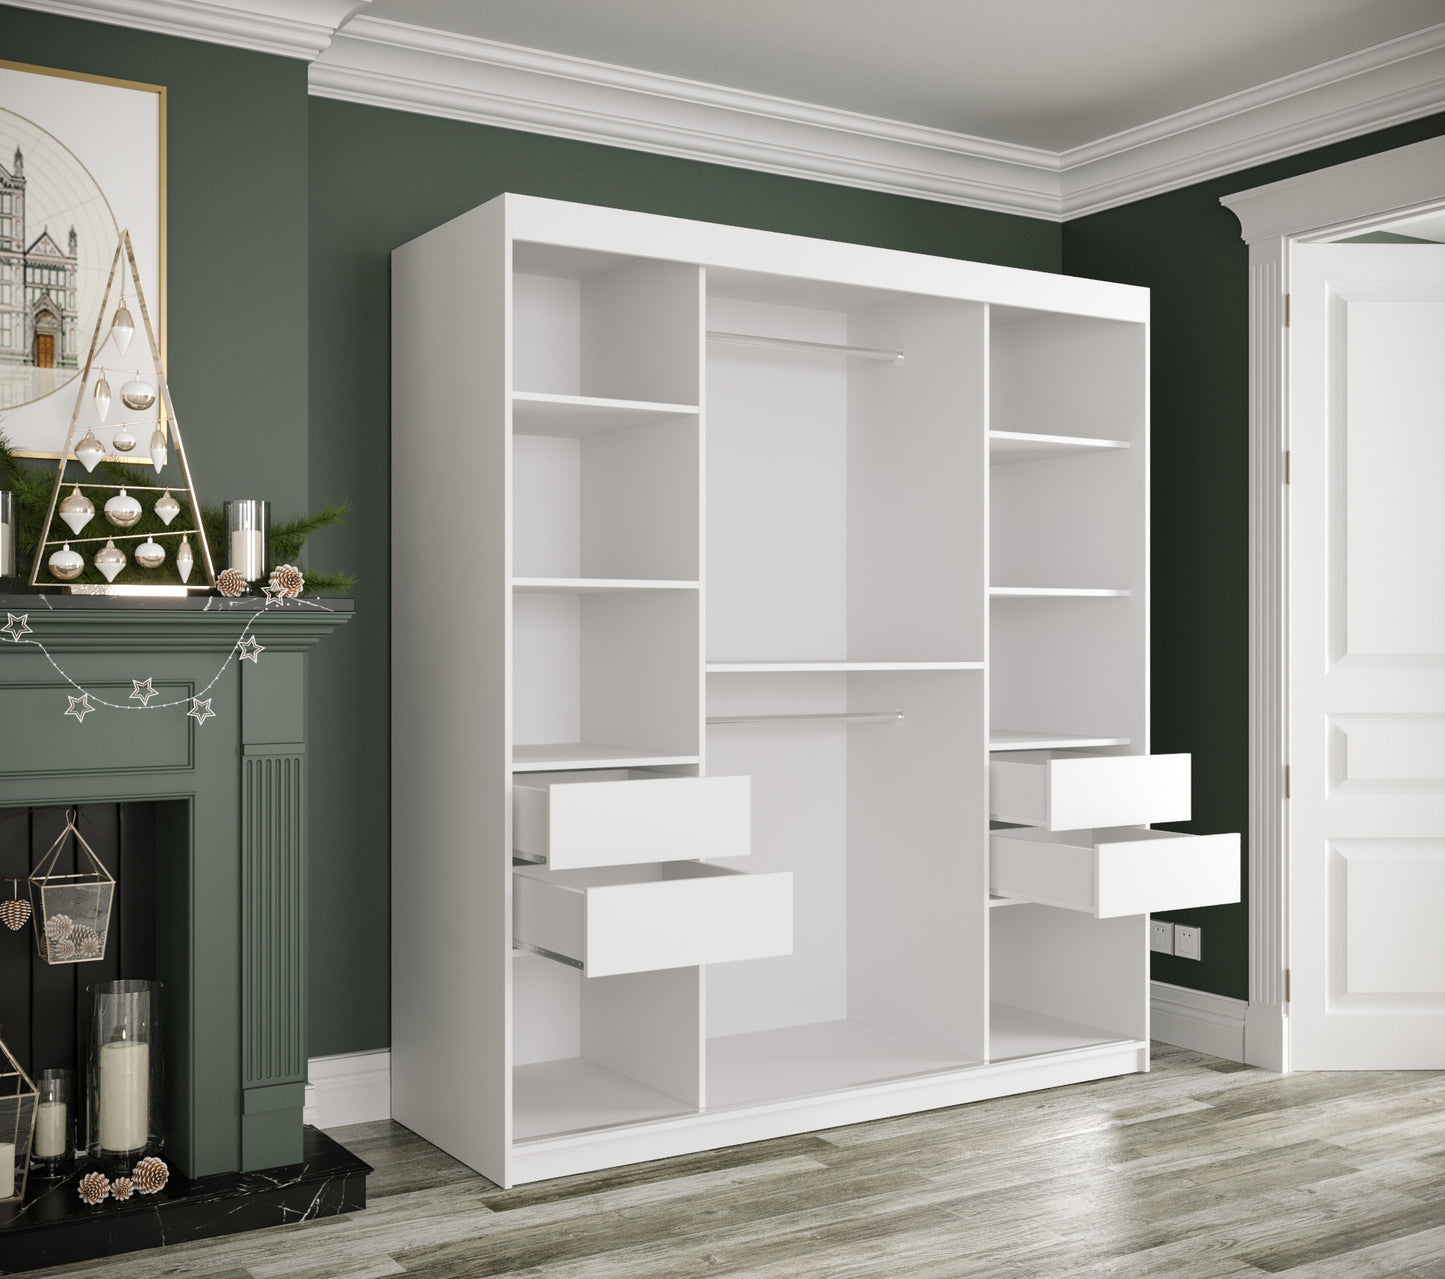 MARBLE T - Wardrobe with Sliding Doors, Shelves, 2 x Hanging Rails and Optional Drawers >180cm<